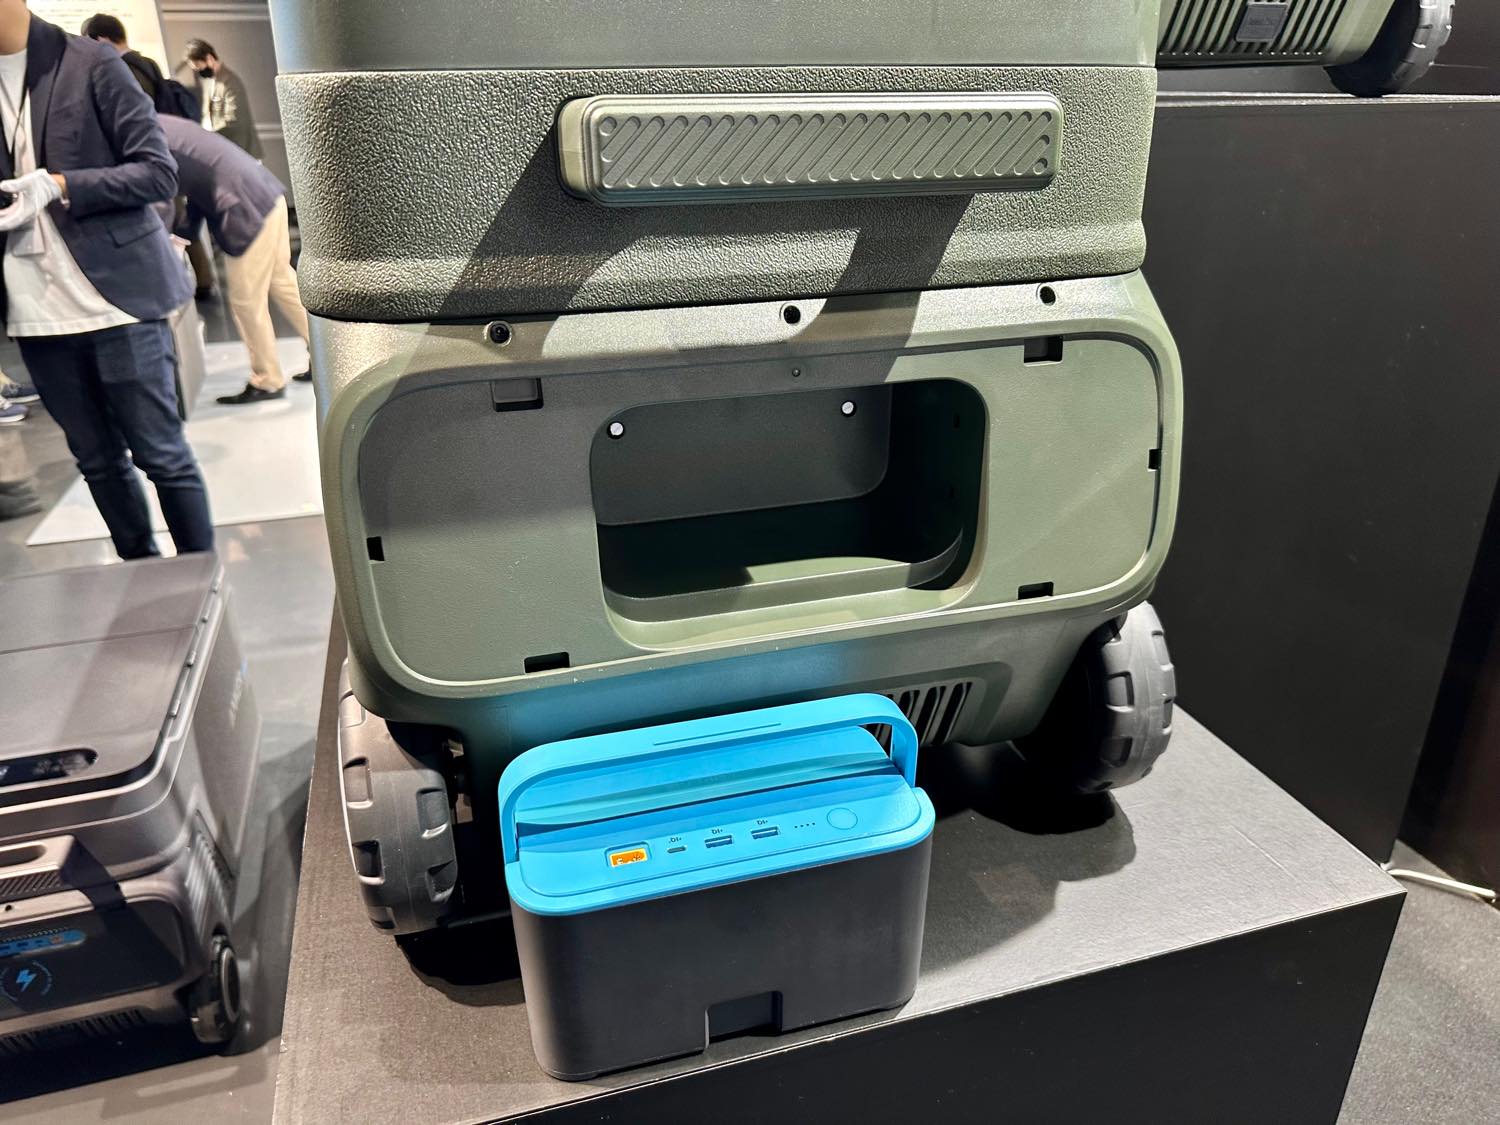 Anker、バッテリー搭載ポータブル冷蔵庫｢Anker EverFrost Powered Cooler｣シリーズを発表